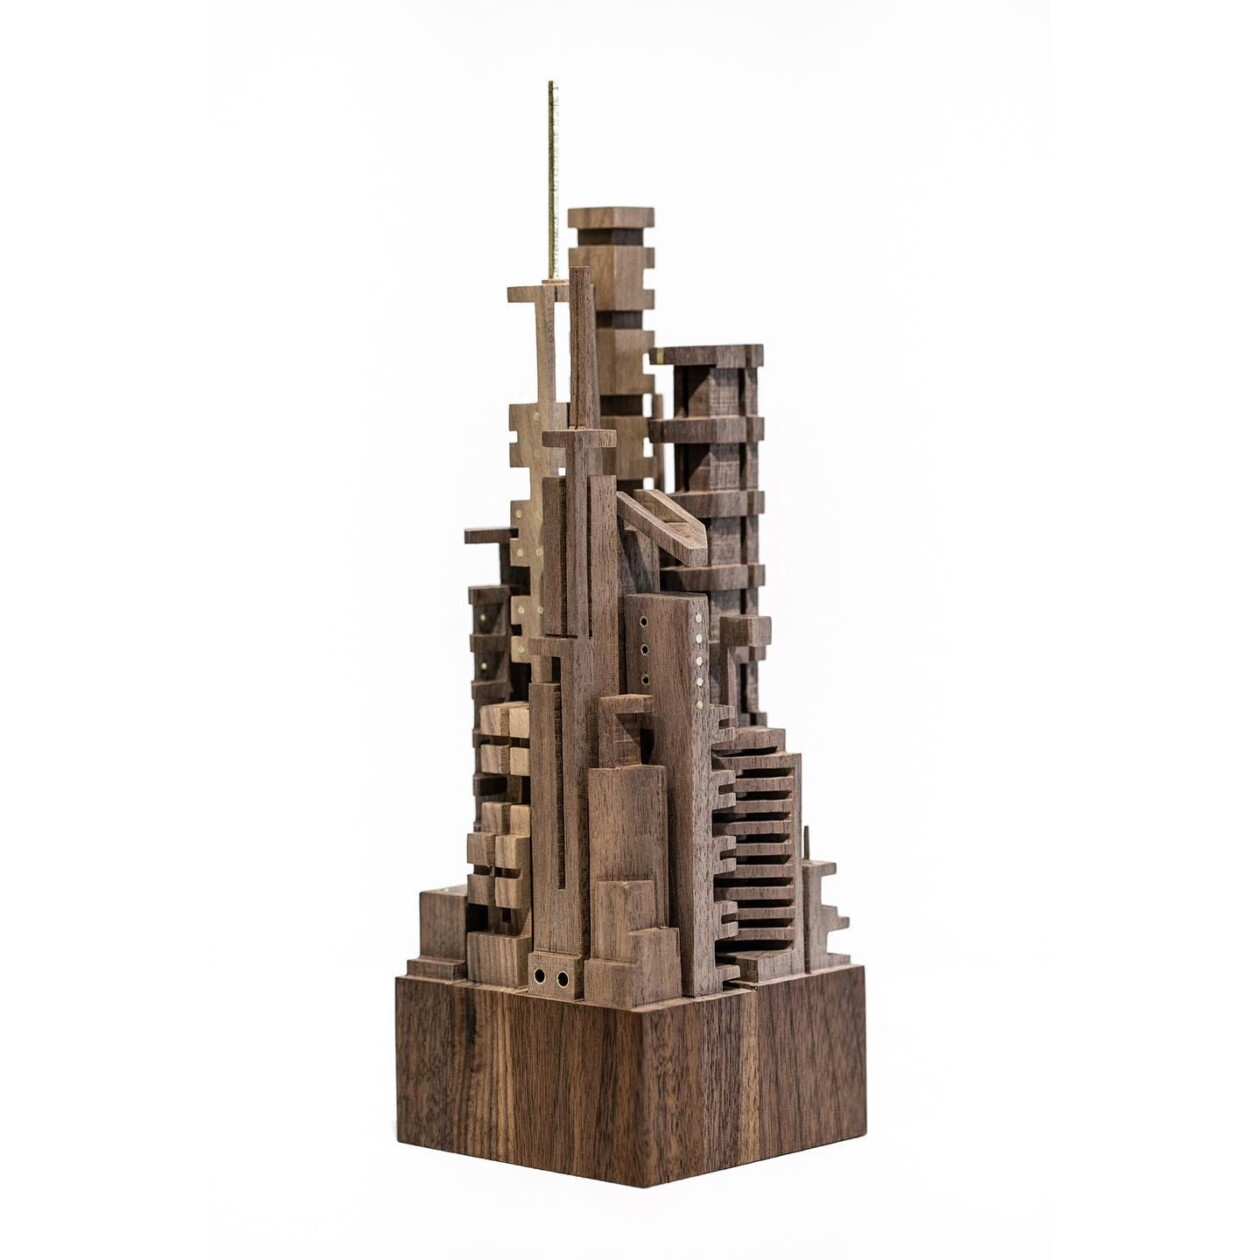 Intricate Cityscape Sculptures Made From Scrap Wood By James Mcnabb (1)